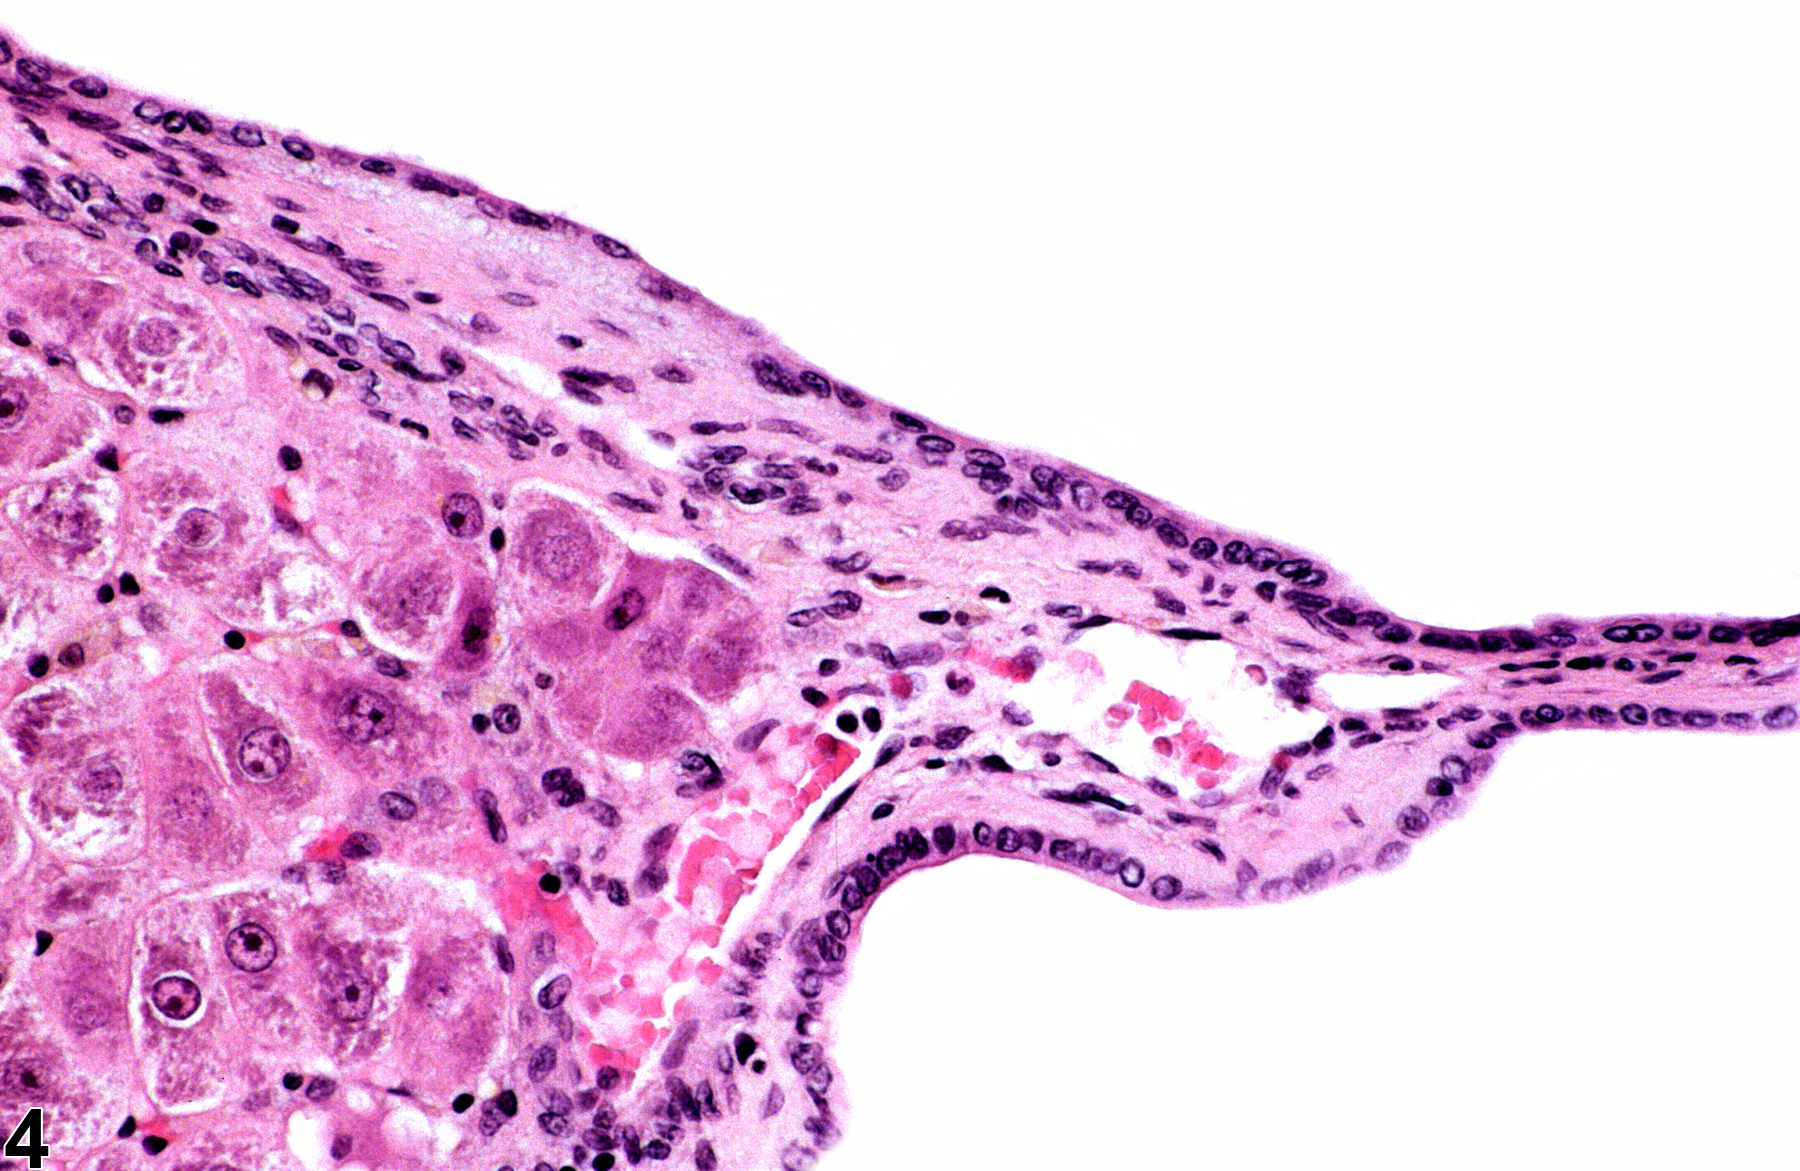 Image of cyst in the liver bile duct from a female Harlan Sprague-Dawley rat in a chronic study